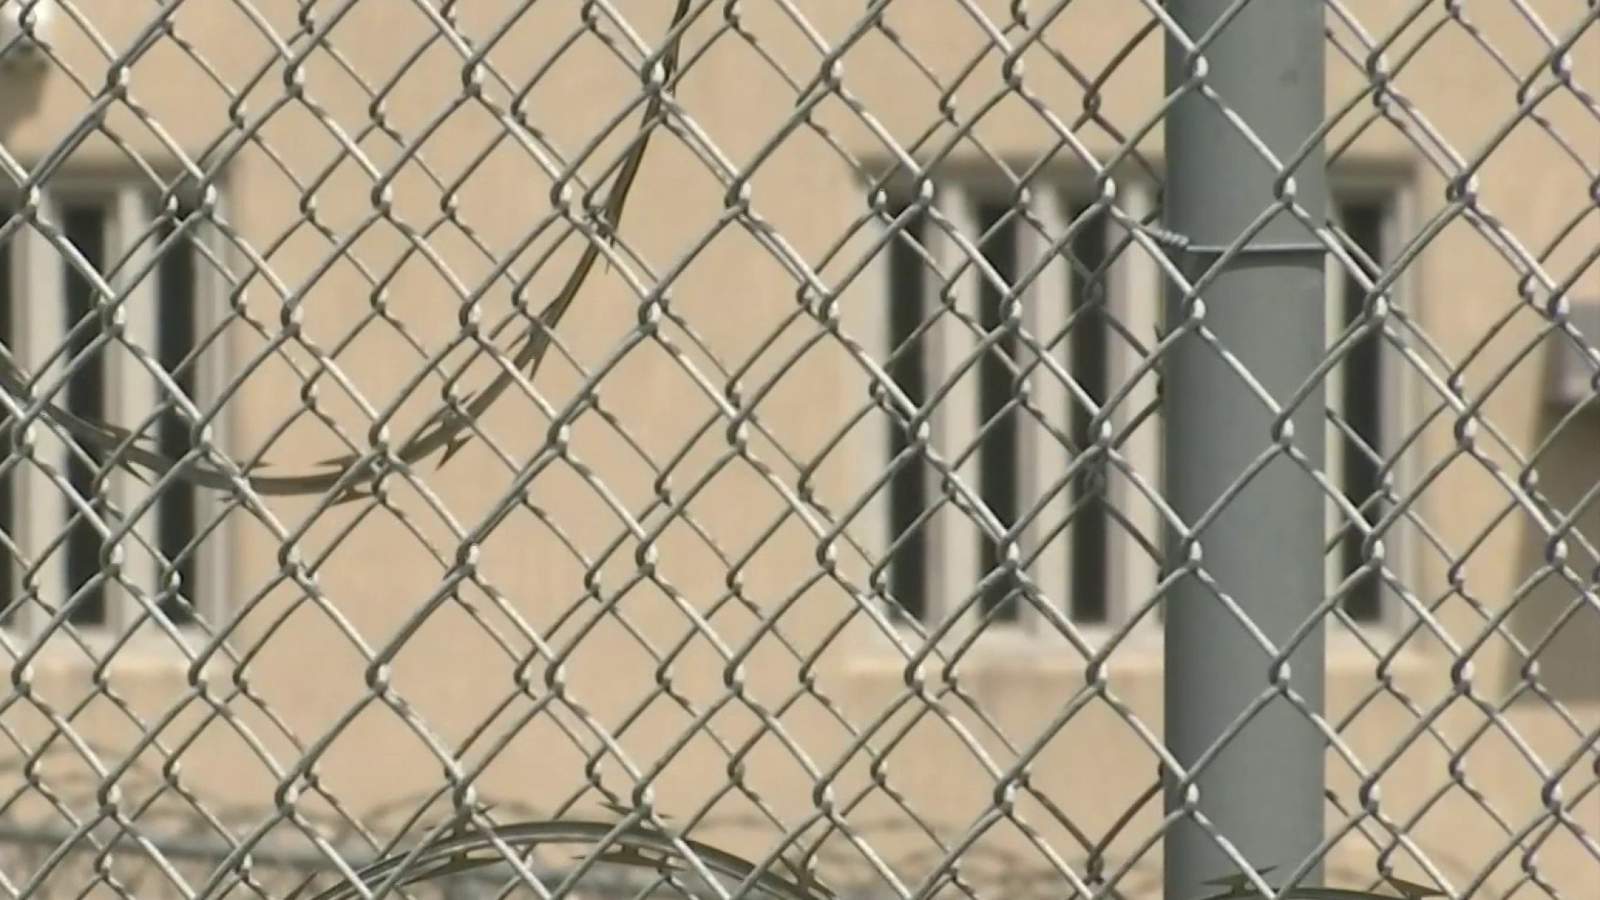 Brevard Jail reports no confirmed active COVID-19 cases, but questions remain